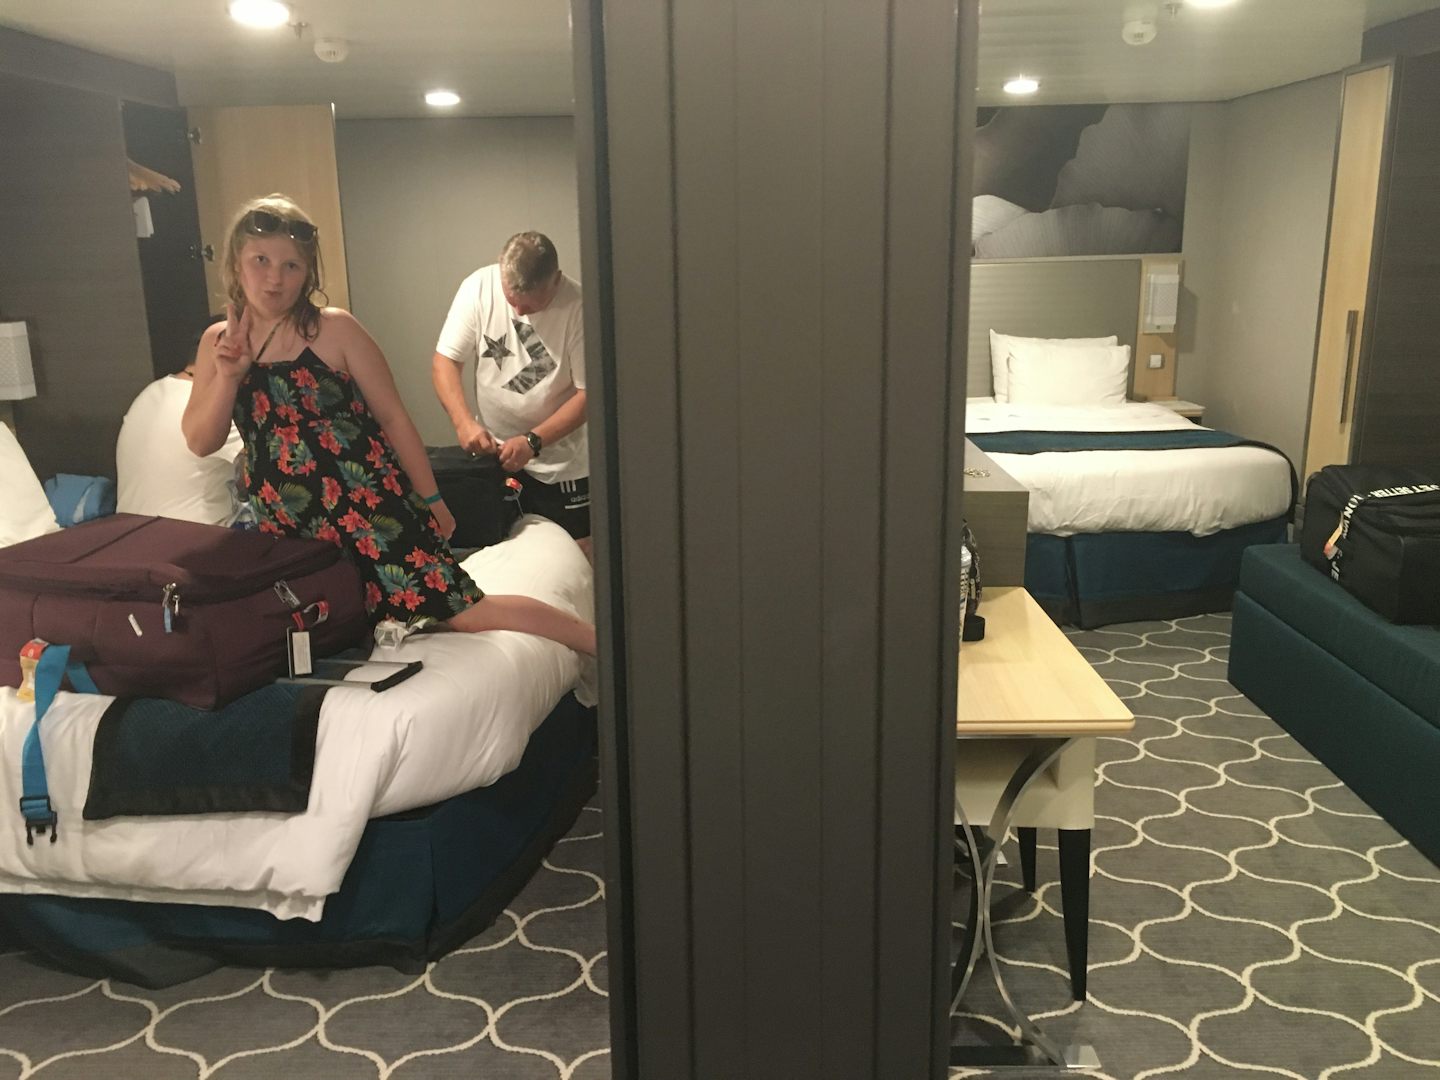 Inside staterooms 8535/8537
Bed towards back wall and then side wall in other connected room